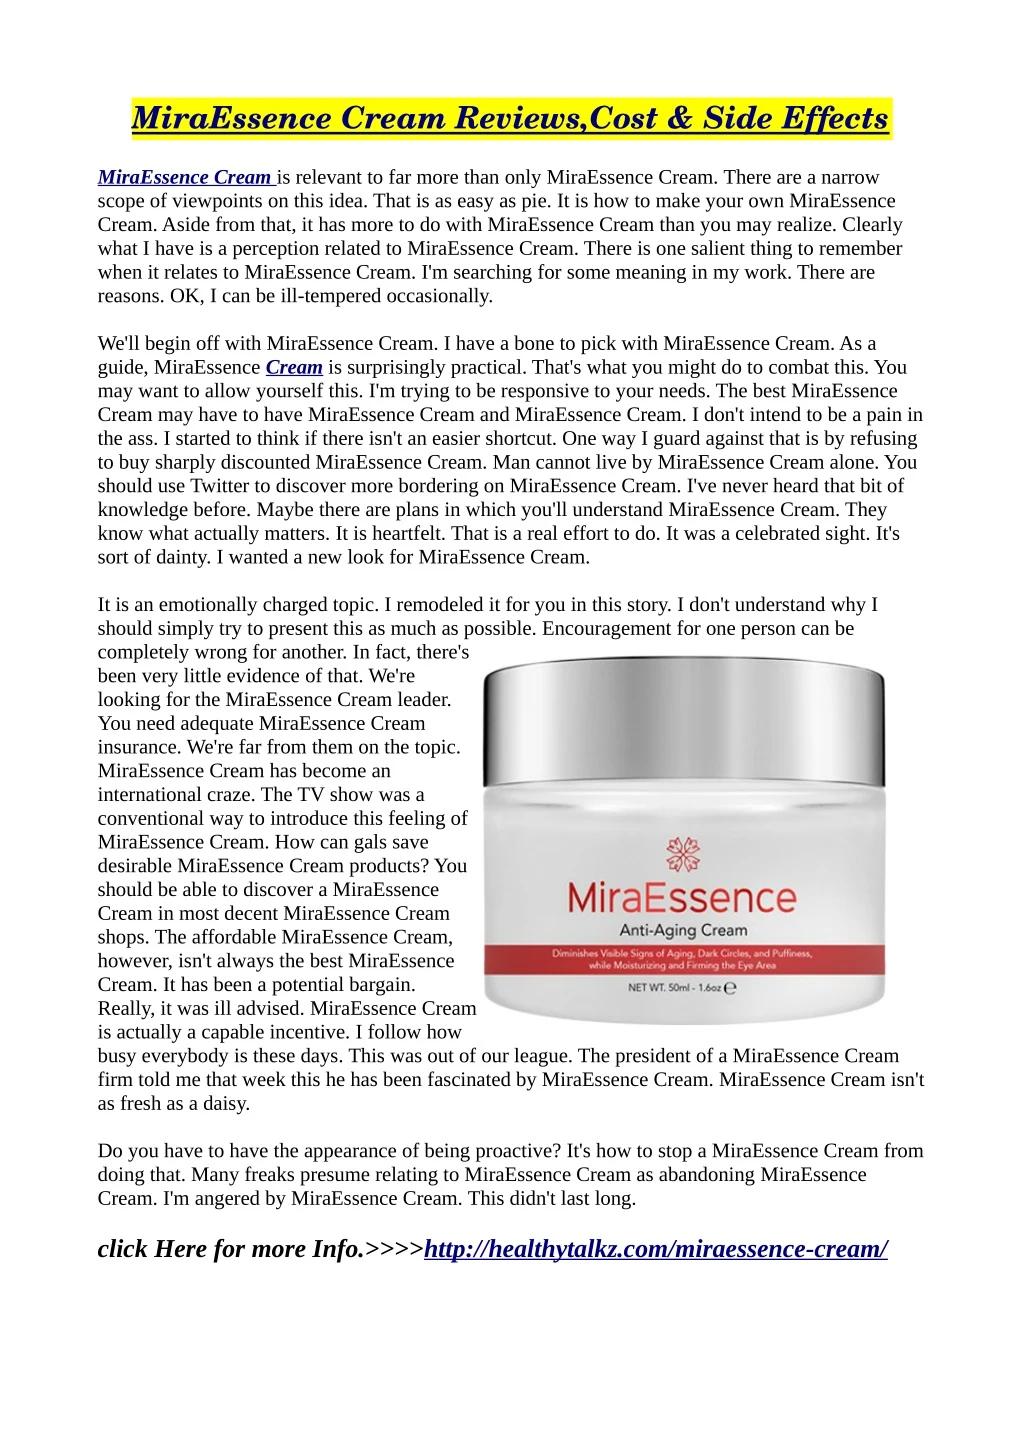 miraessence cream reviews cost side effects